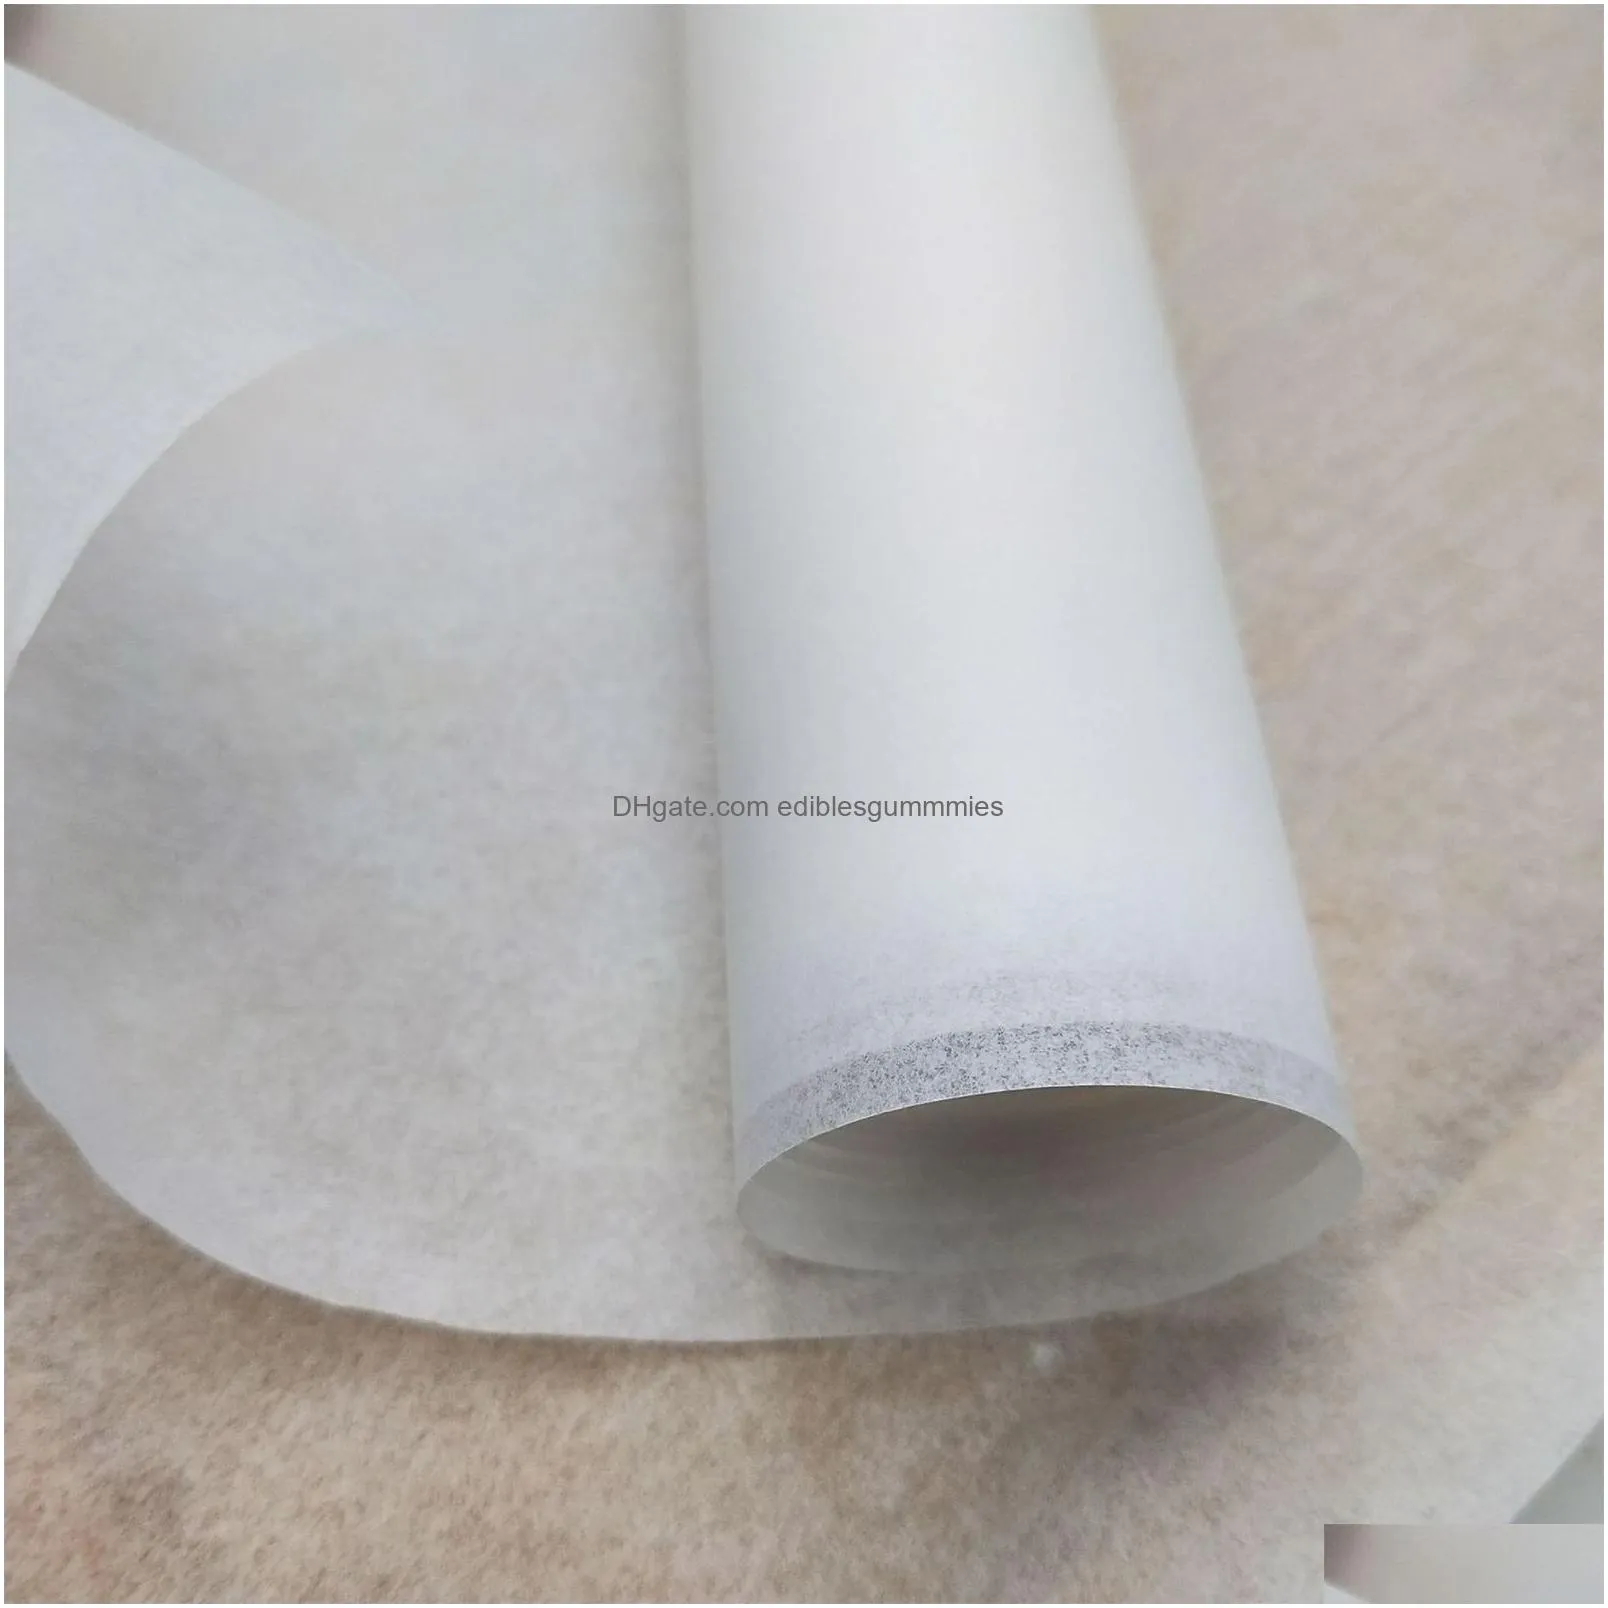  oven grease paper 5m oil-proof waterproof high-temperature grill paper baking tray silicon grease paper wholesale